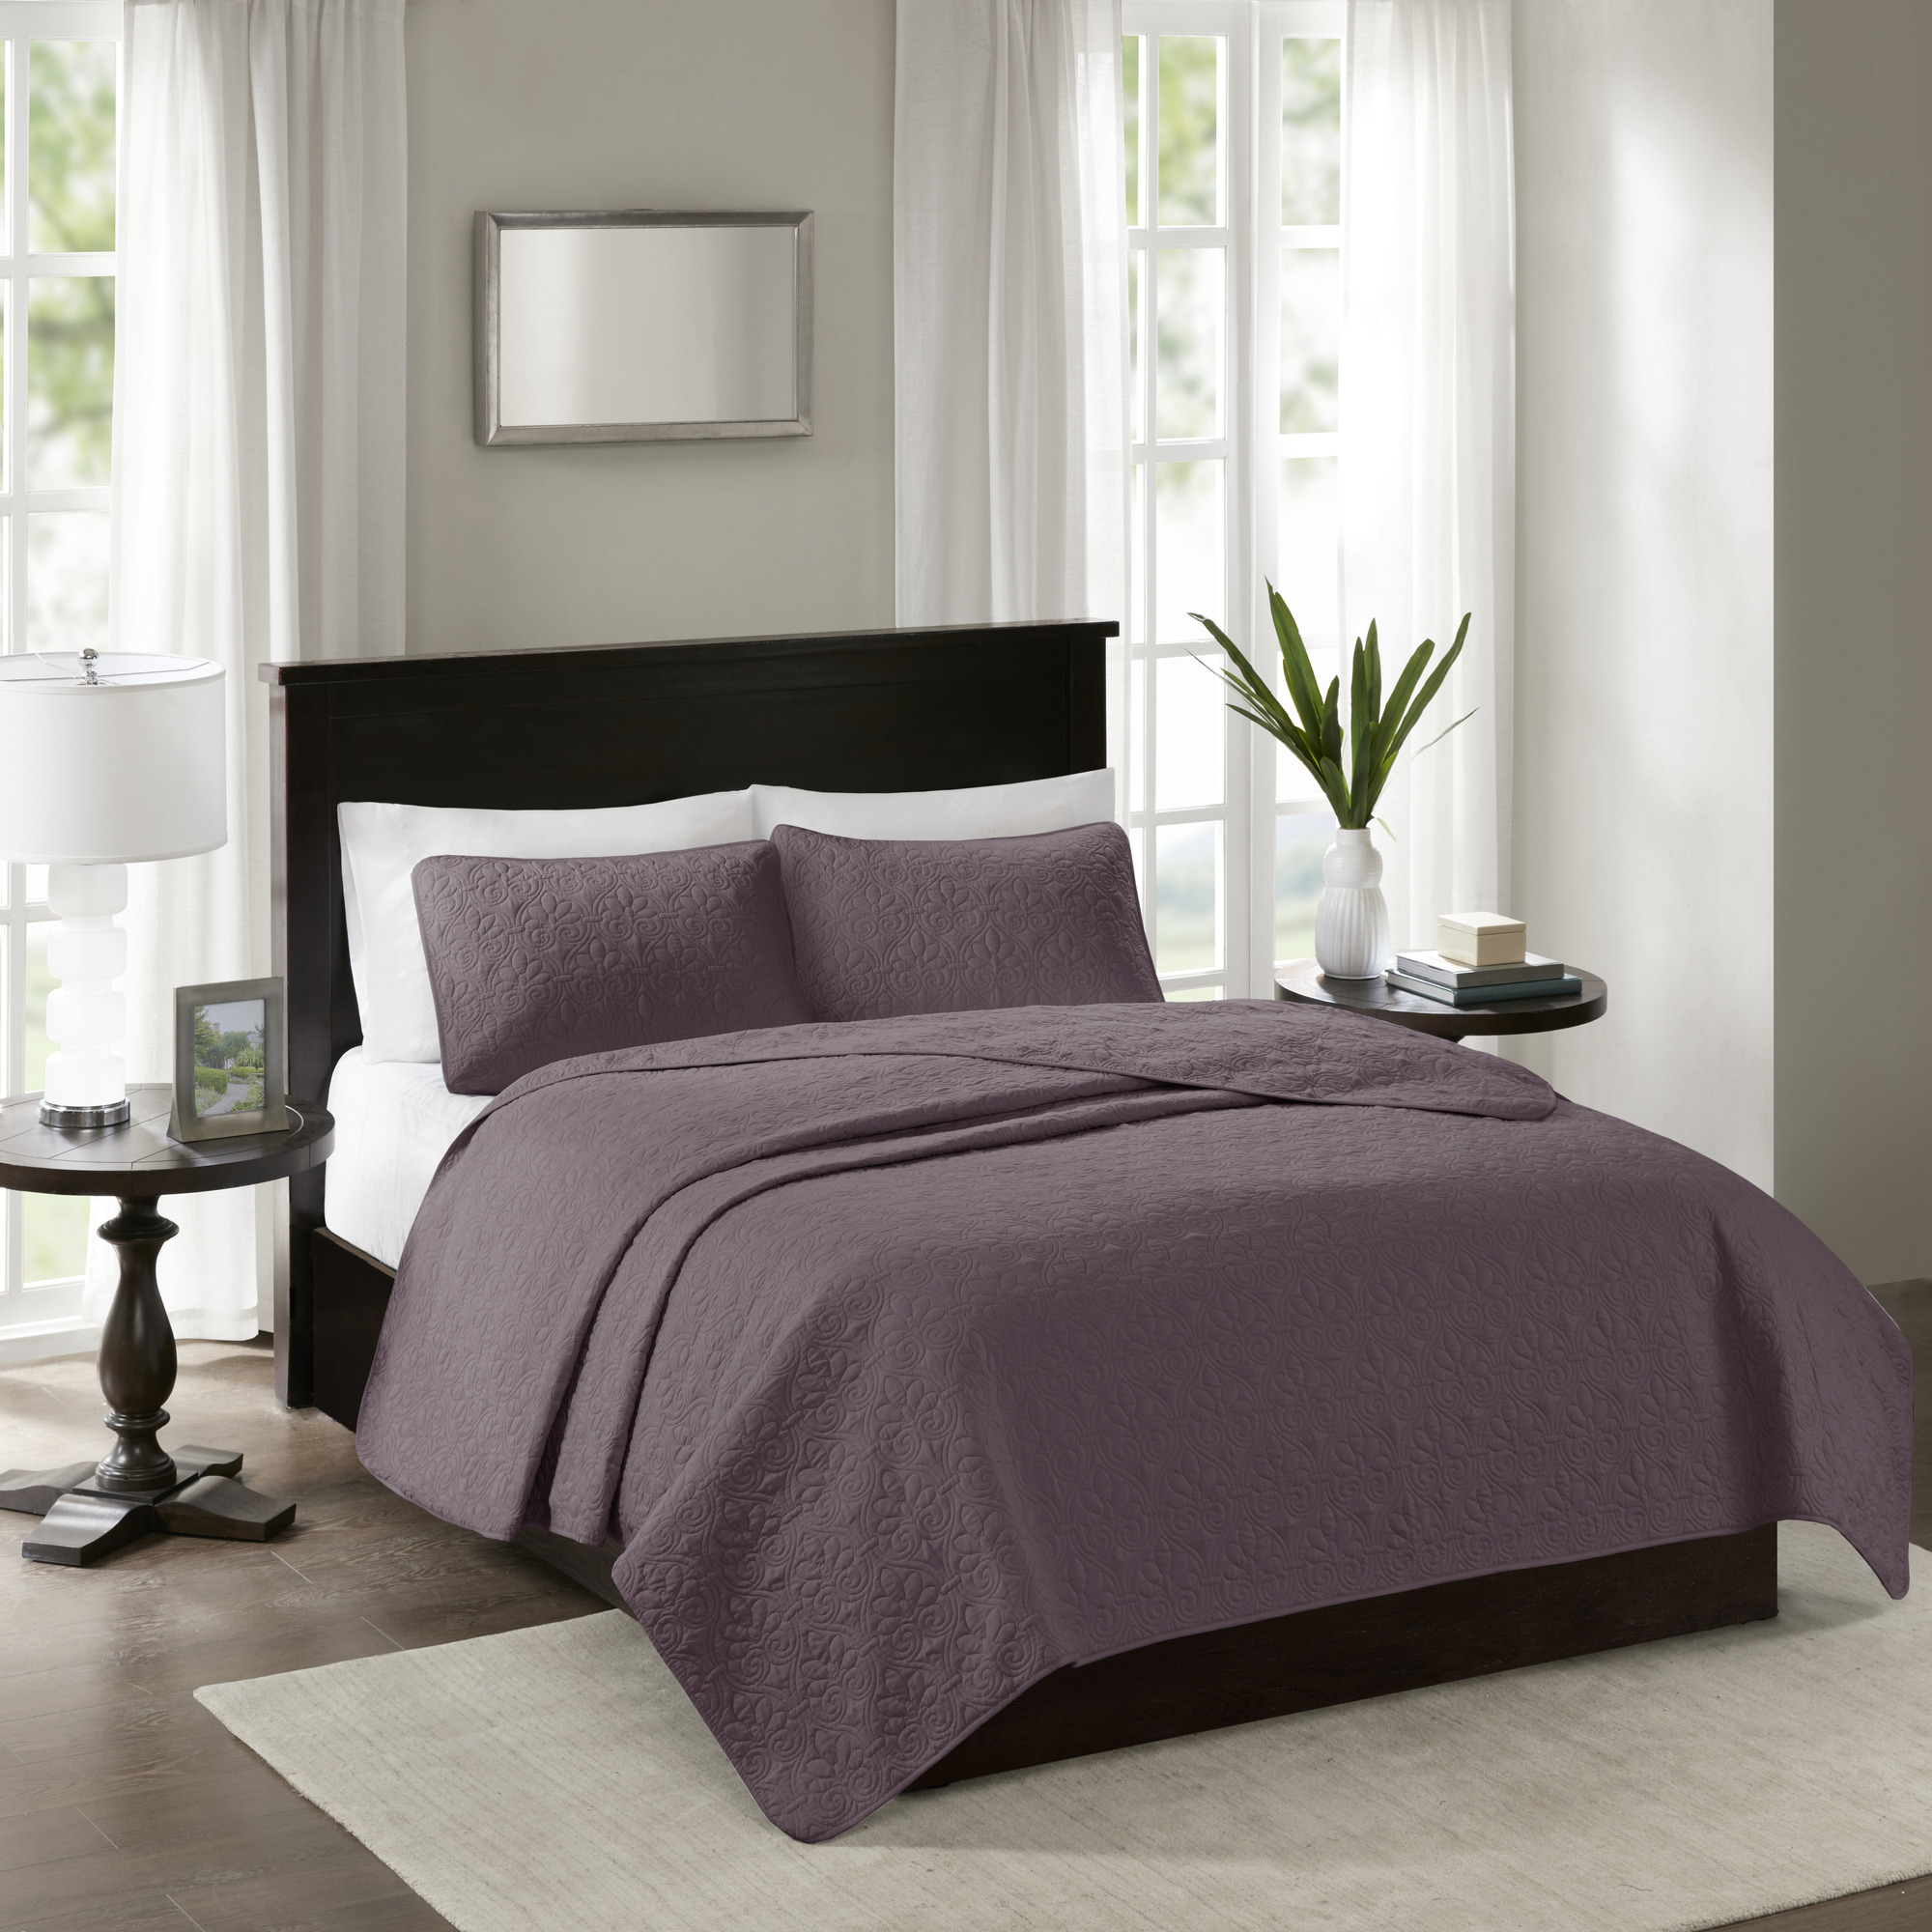 Home Essence Vancouver Super Soft Reversible Coverlet Set, Purple, Twin/Twin XL - image 4 of 13